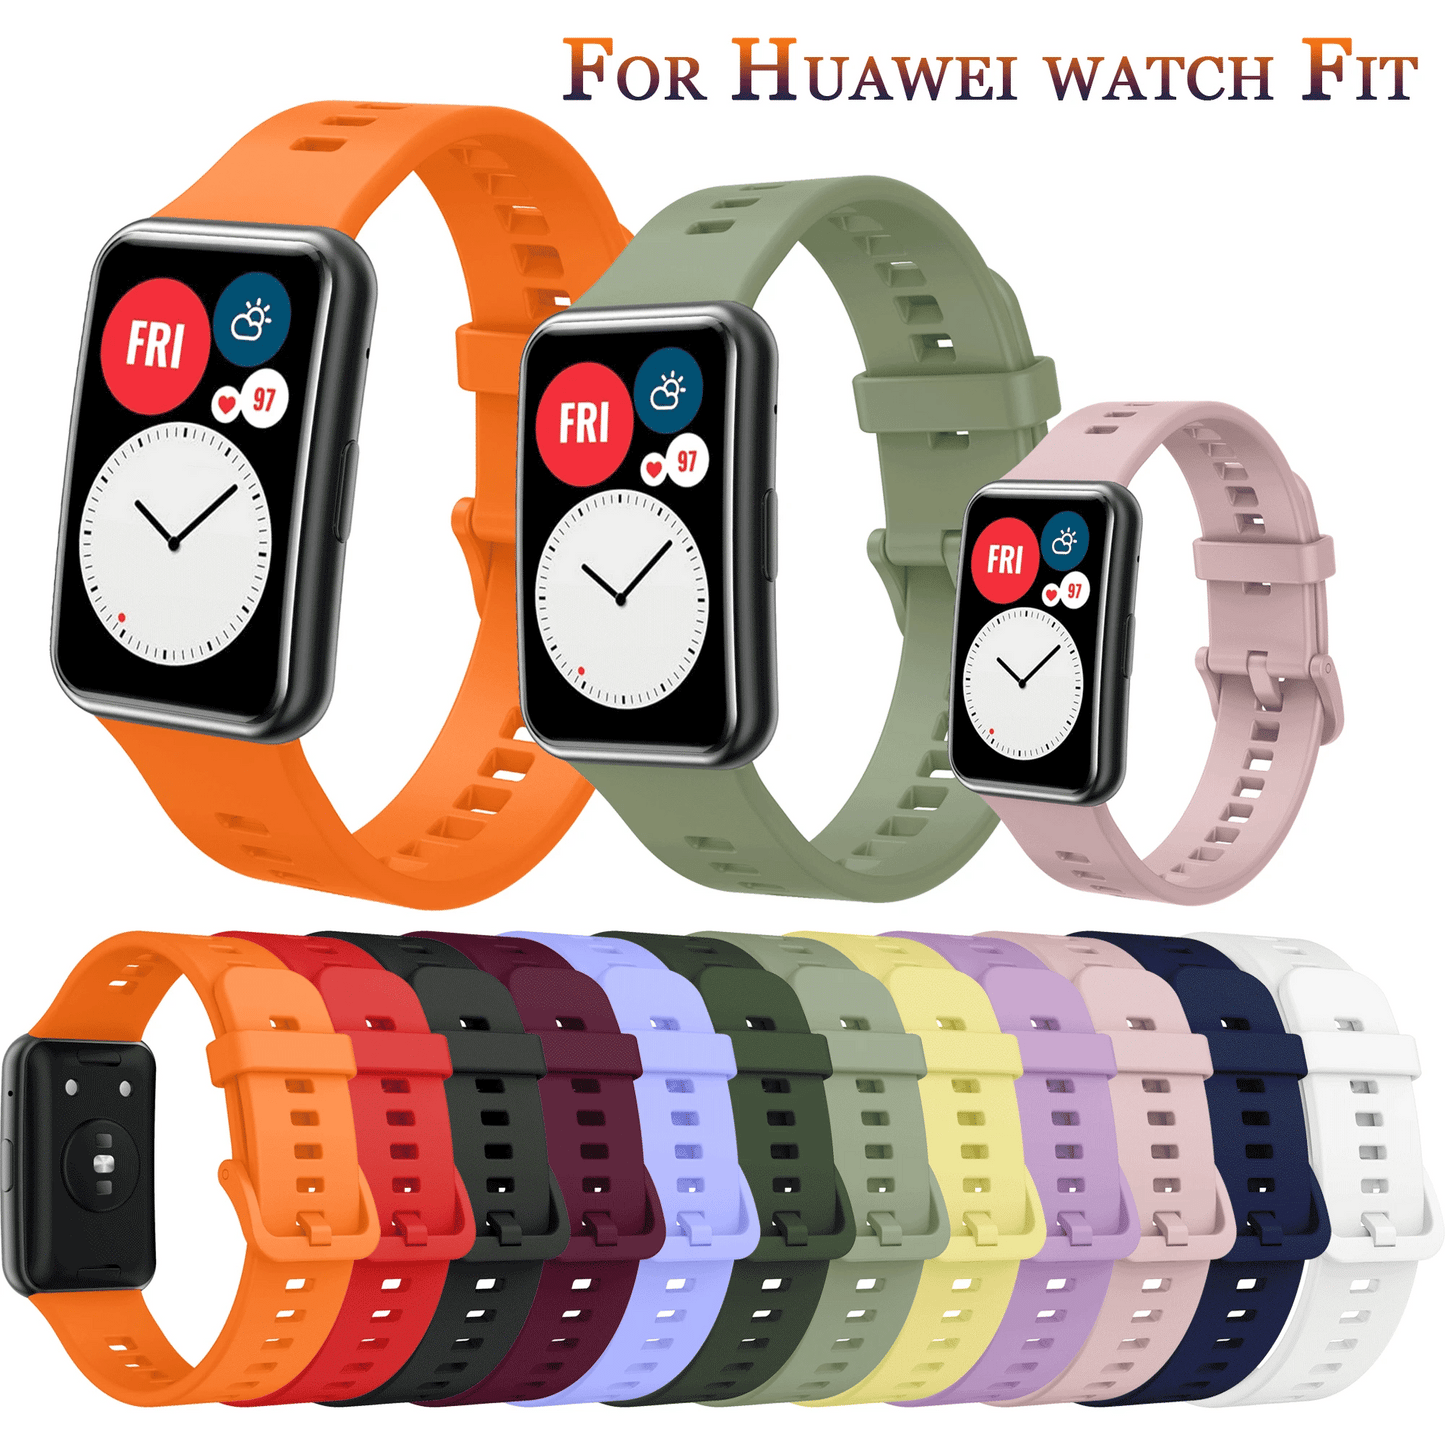 Soft Silicone Watch Strap For Huawei Watch Fit original SmartWatch Band Accessories For Huawei fit WristBand Bracelet with tool